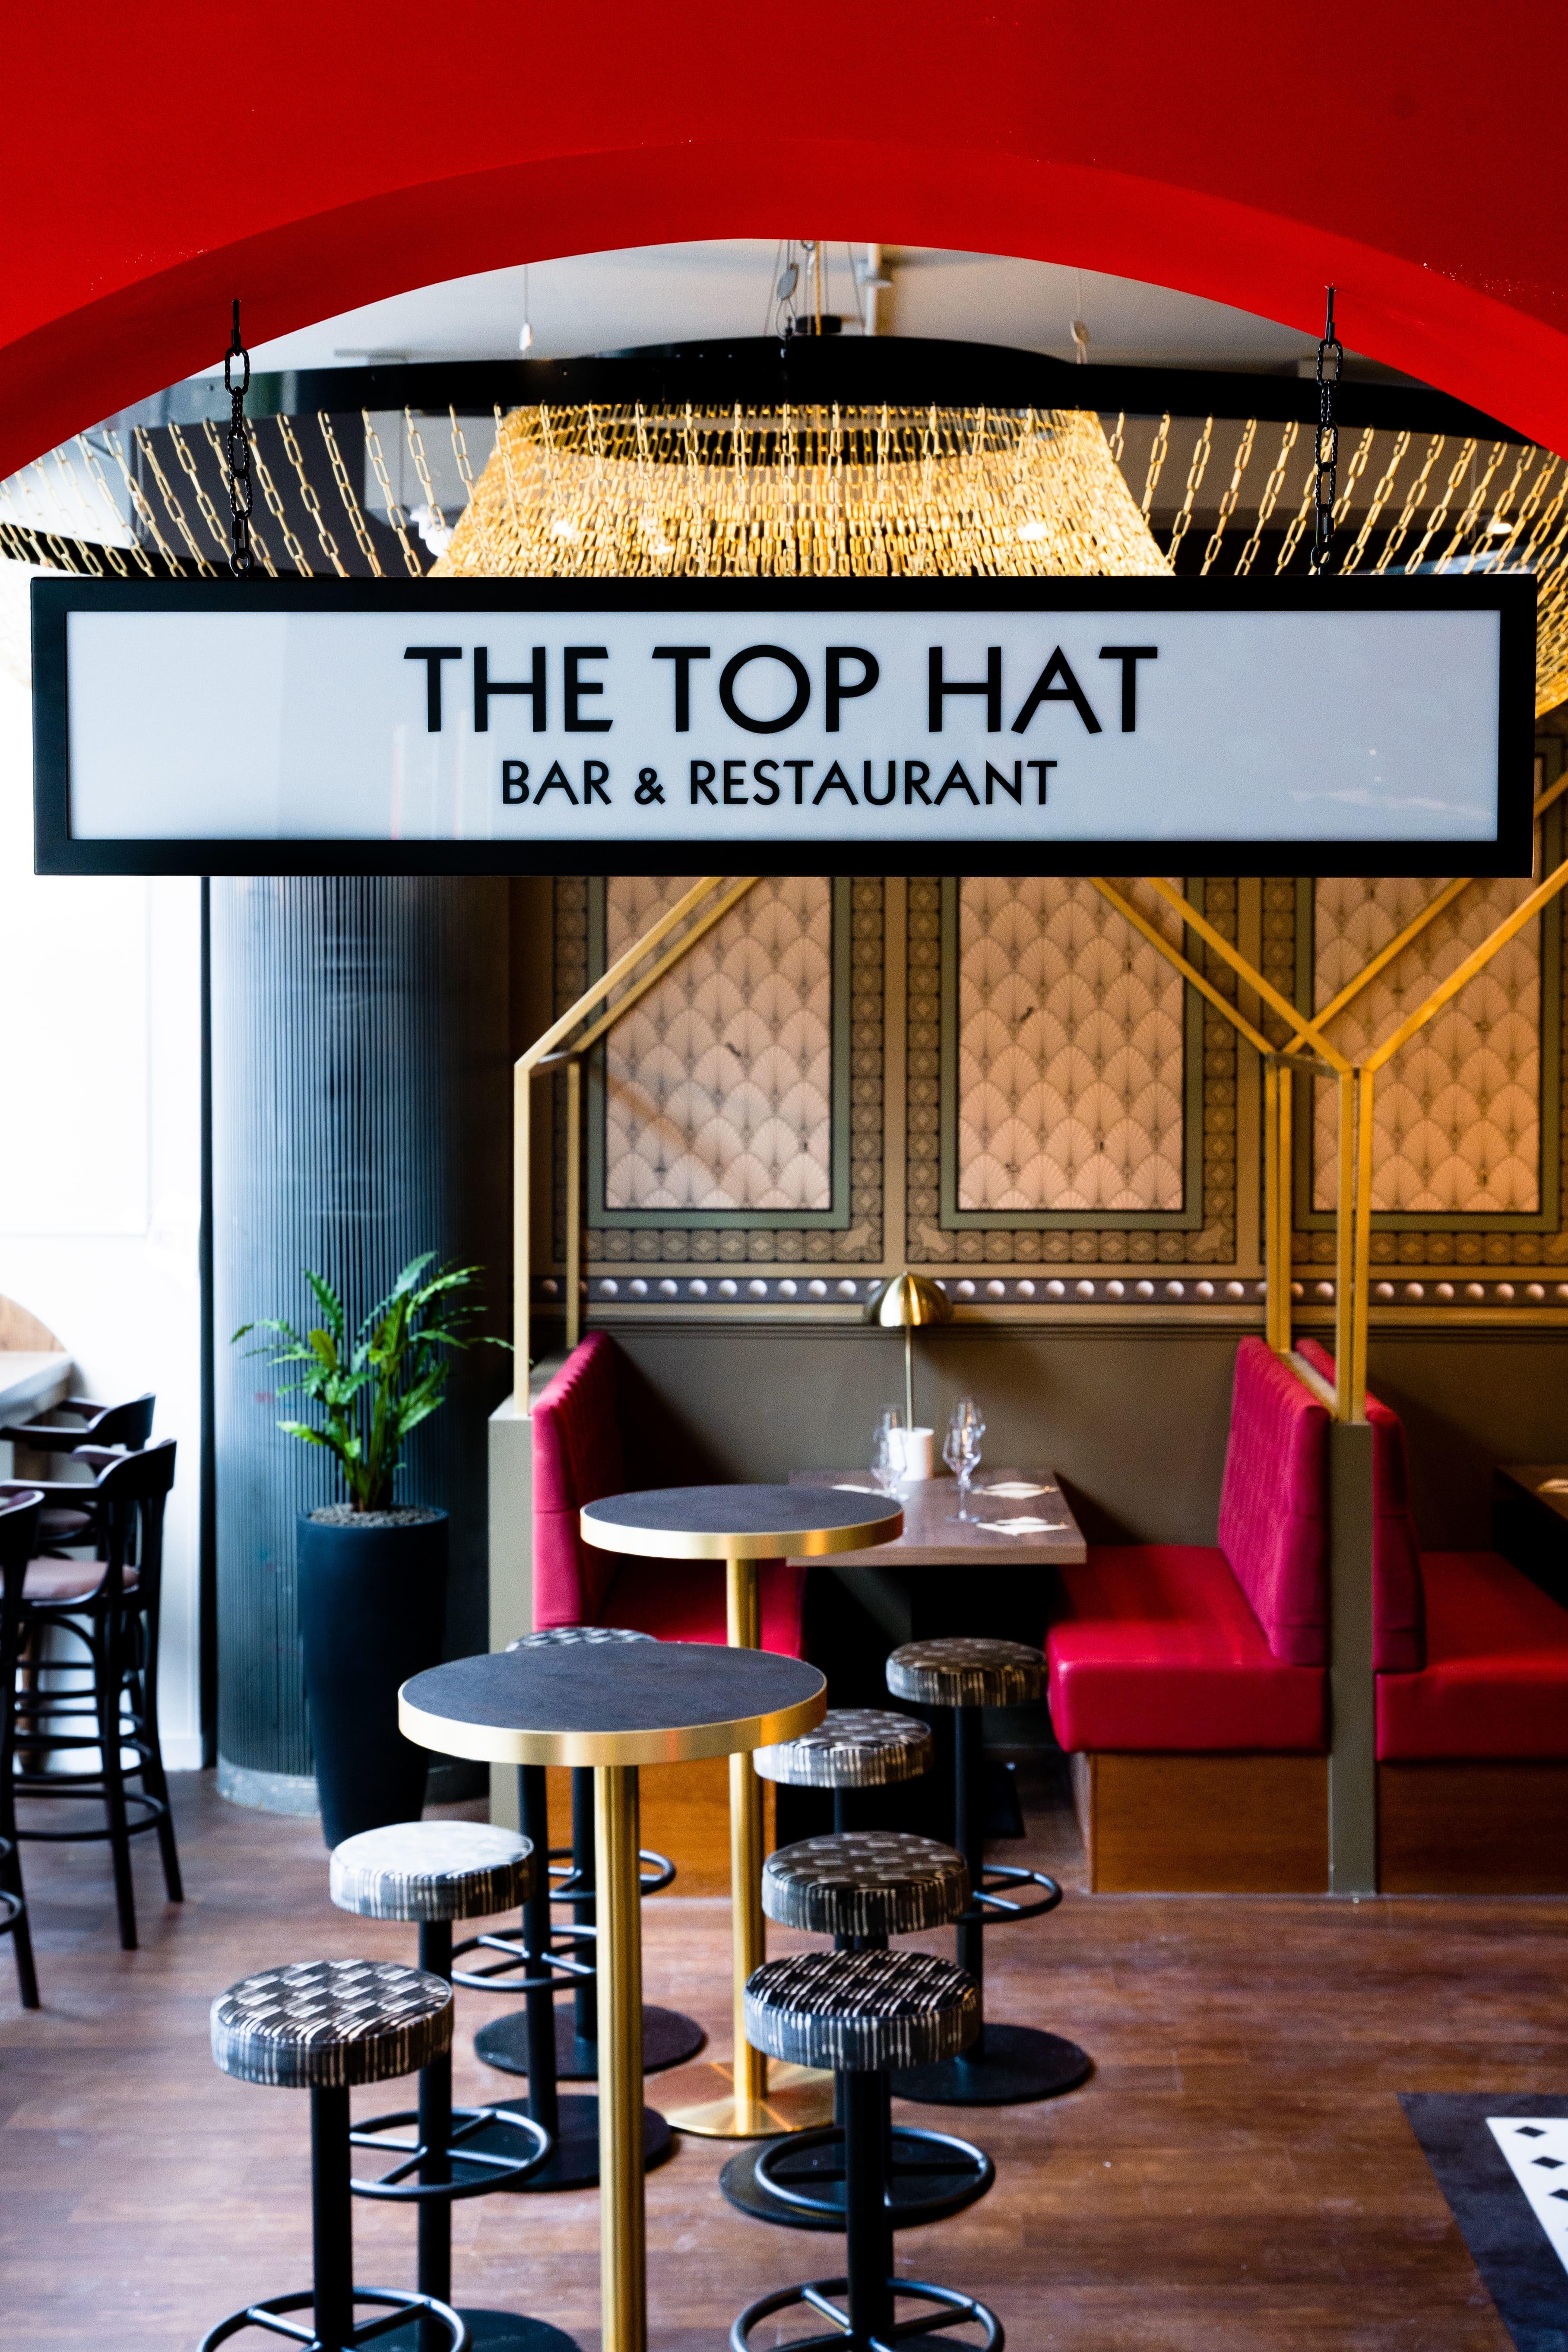 Venue Hire And Experience, Top Hat Restaurant And Bar @ Monopoly Lifesized photo #5